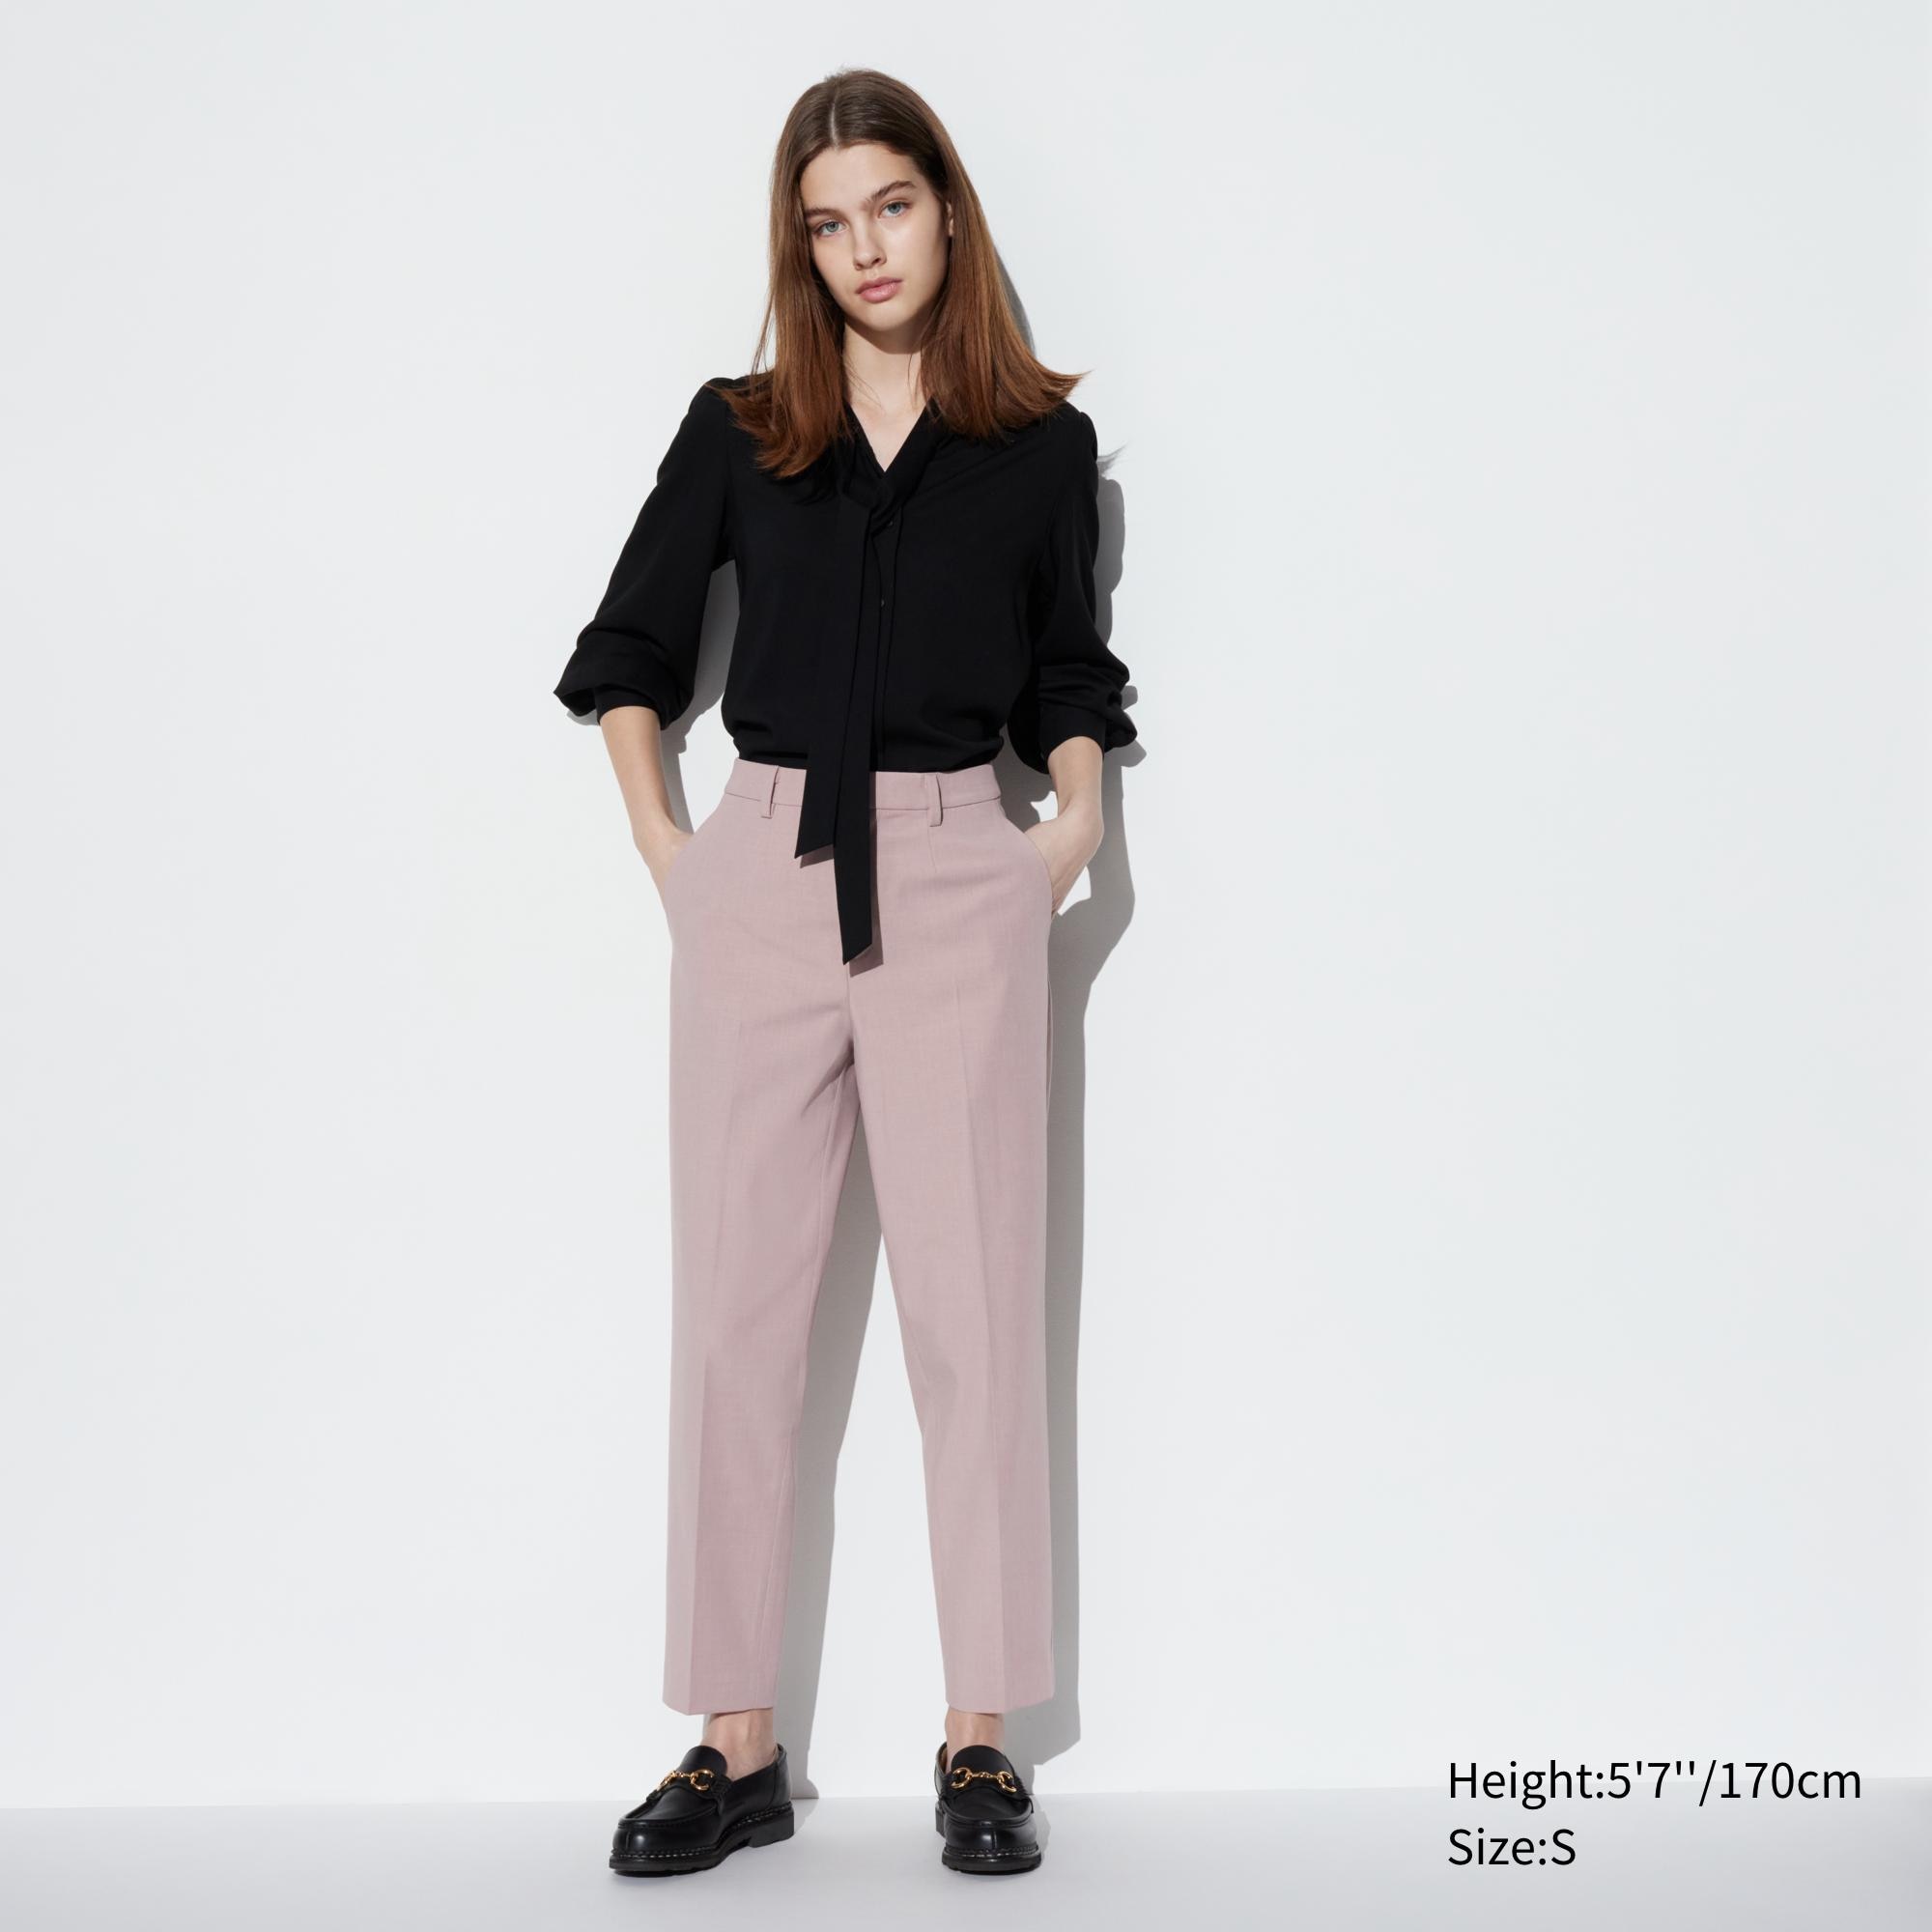 Replying to @A best uniqlo ankle pants alternative so far 👌 check